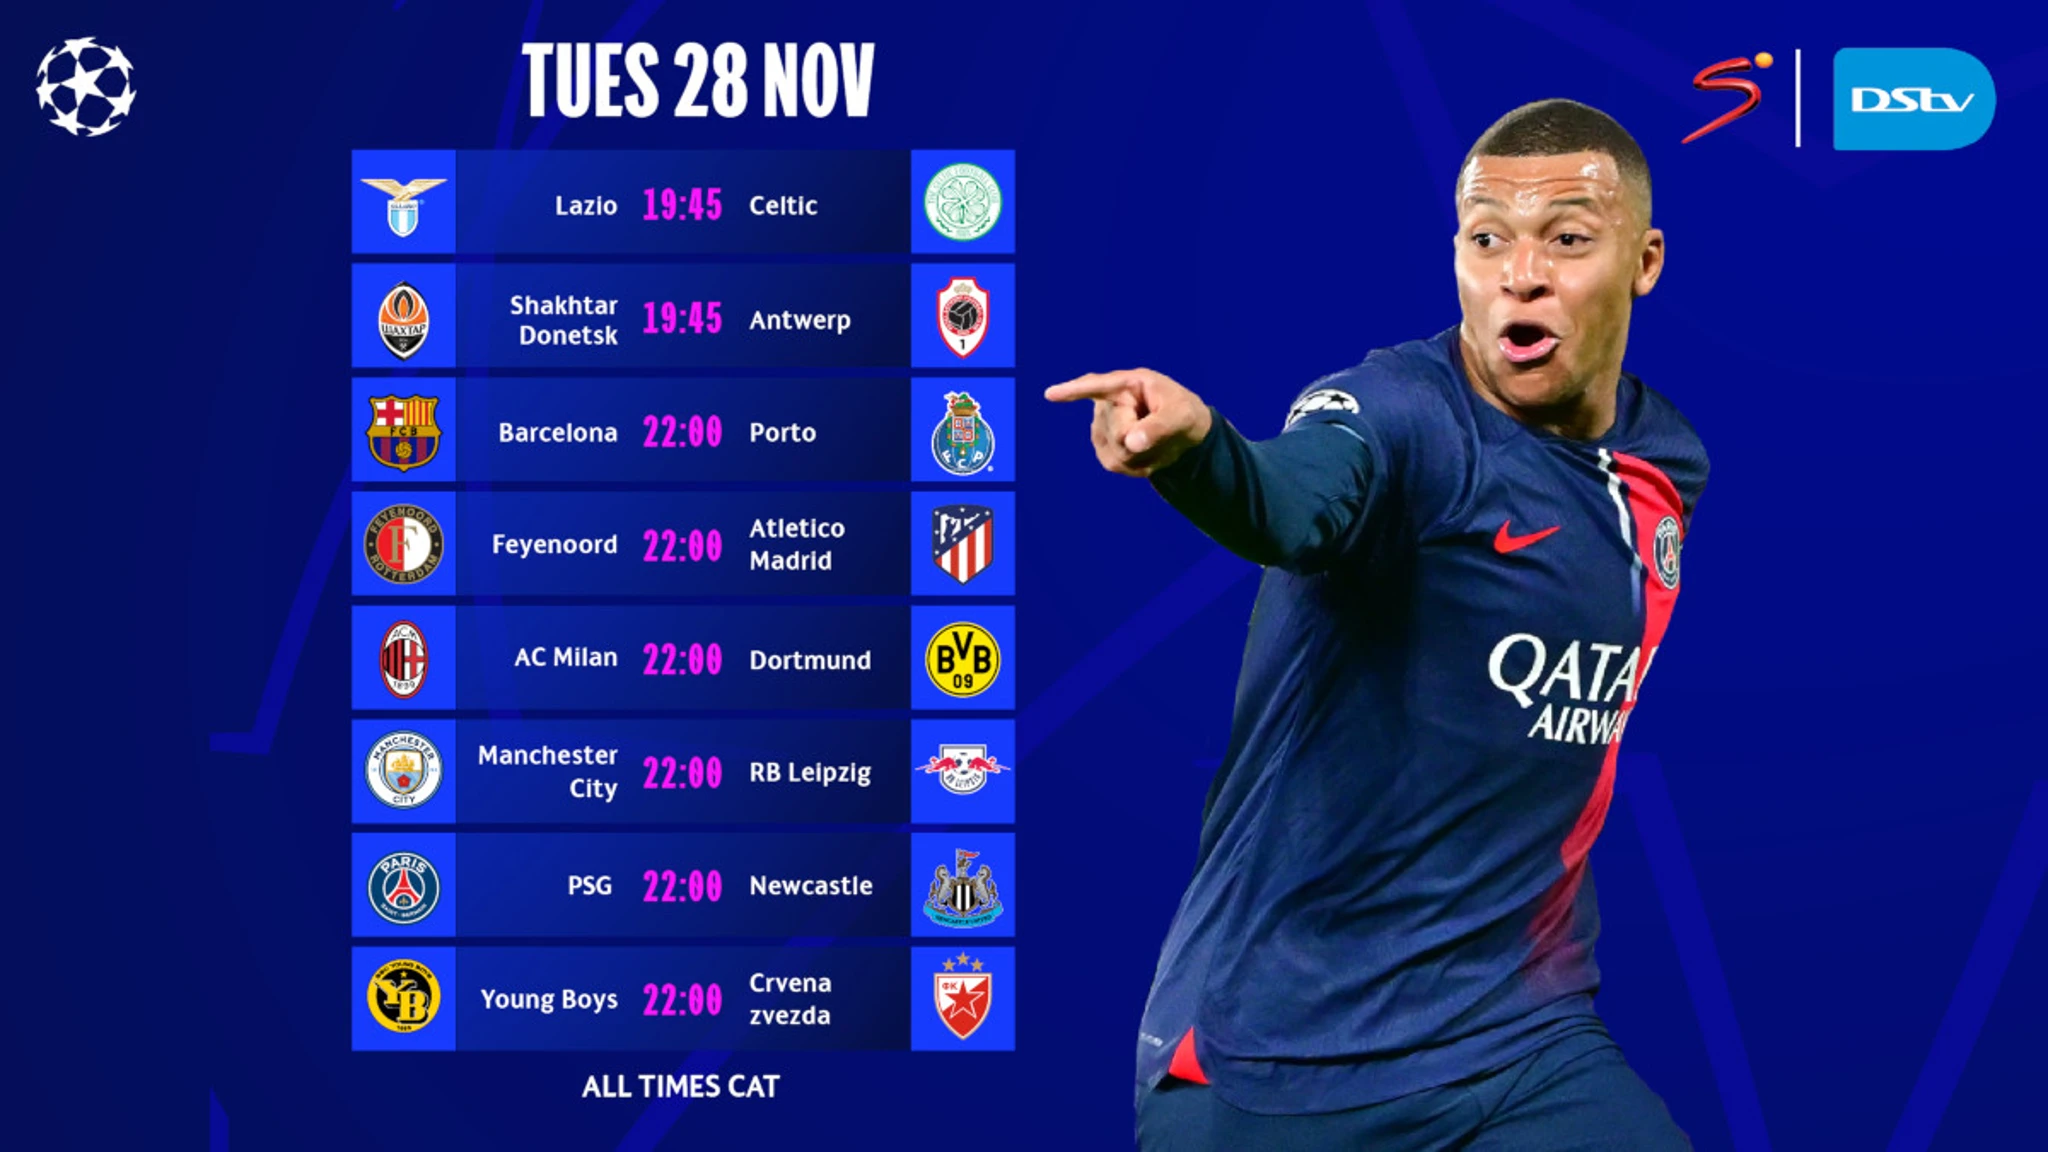 UEFA Champions League returns: Five matches to follow on matchday